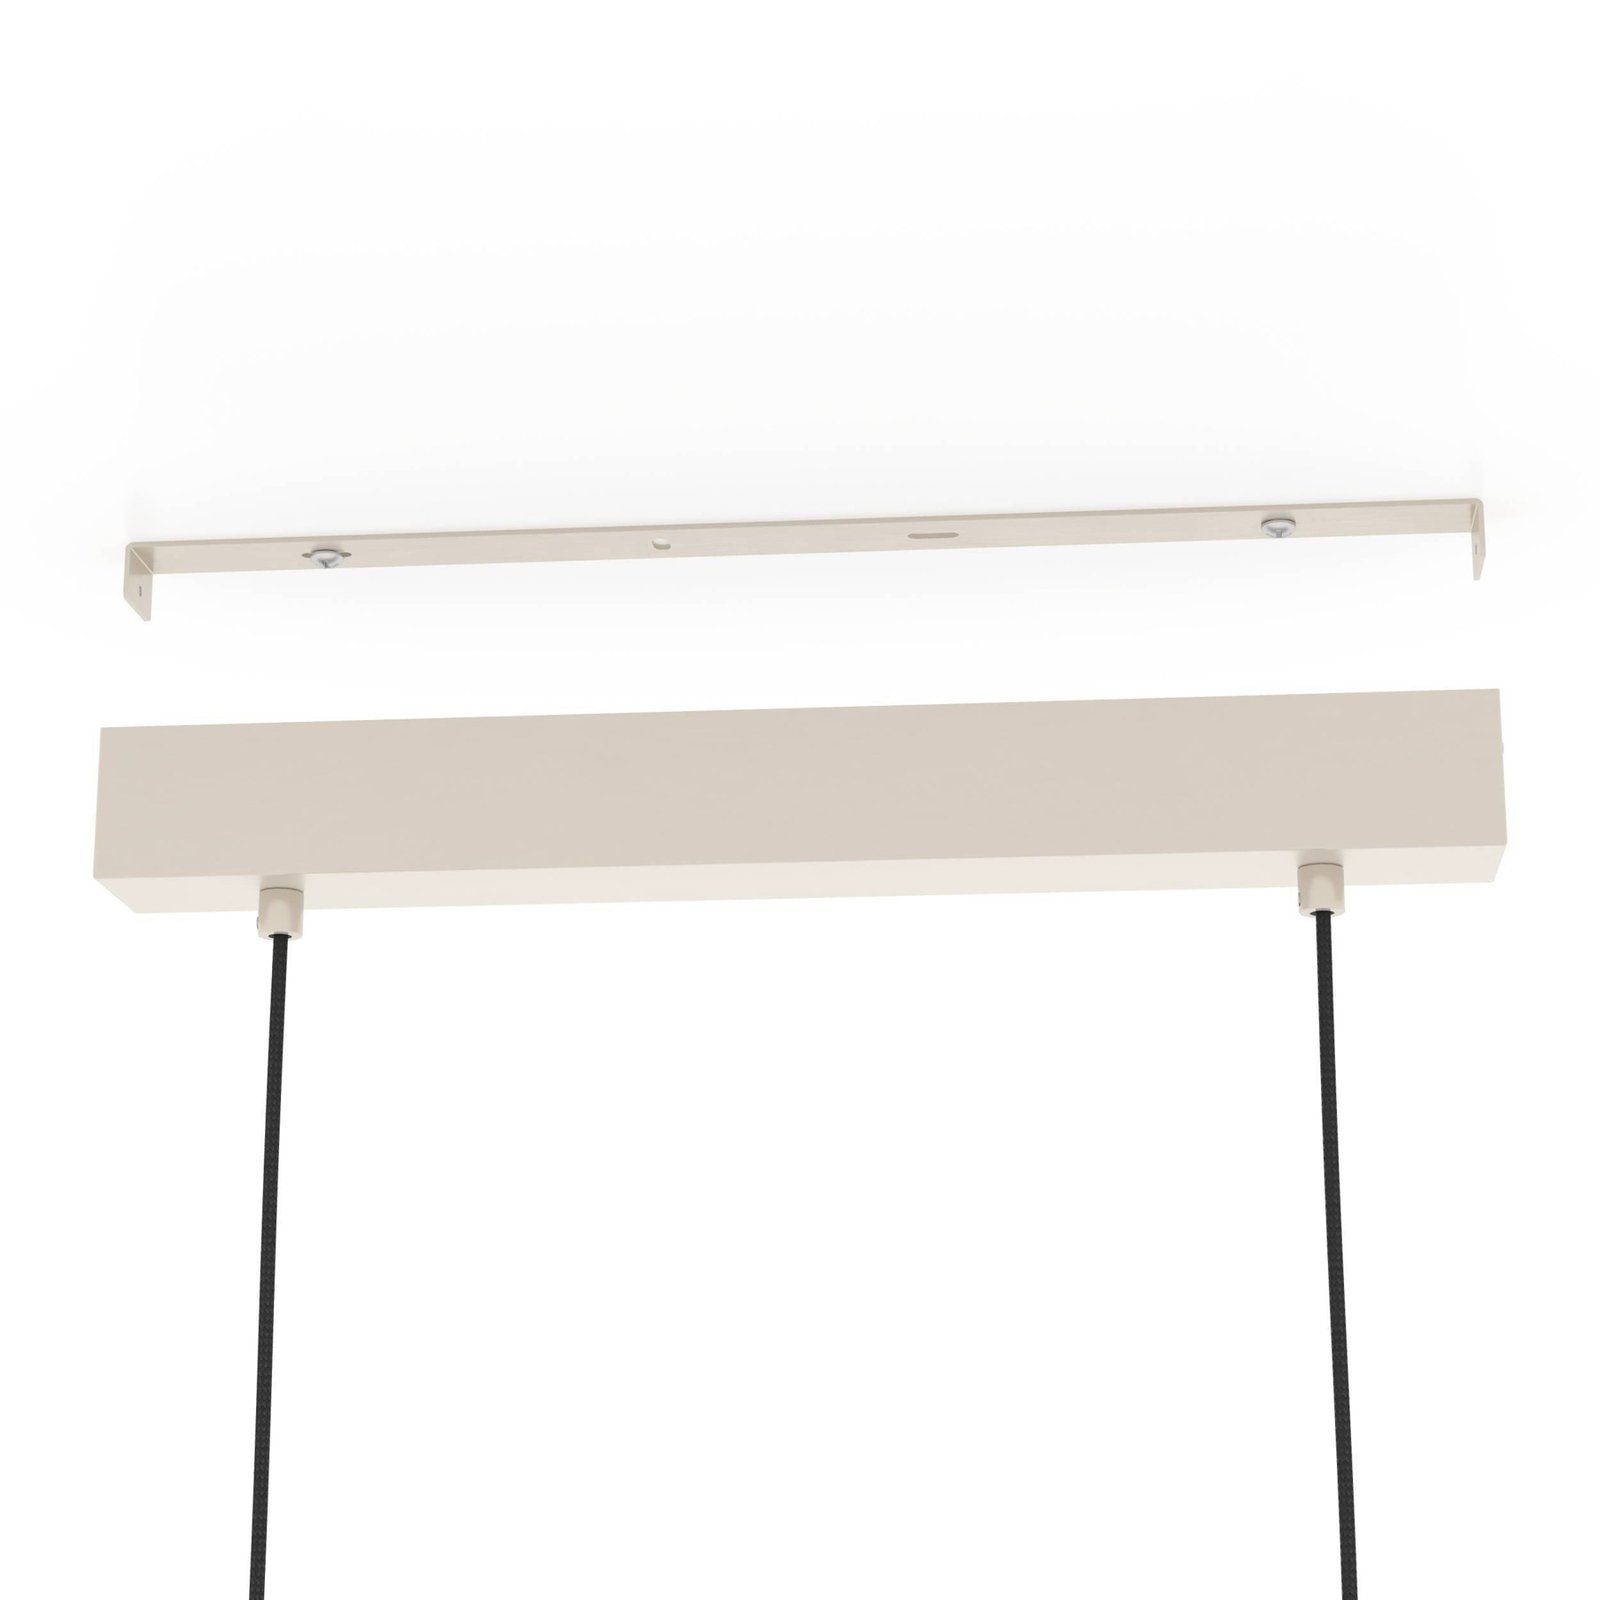 Cawton hanglamp, lengte 76 cm, staal/bruin, 3-lamps, staal